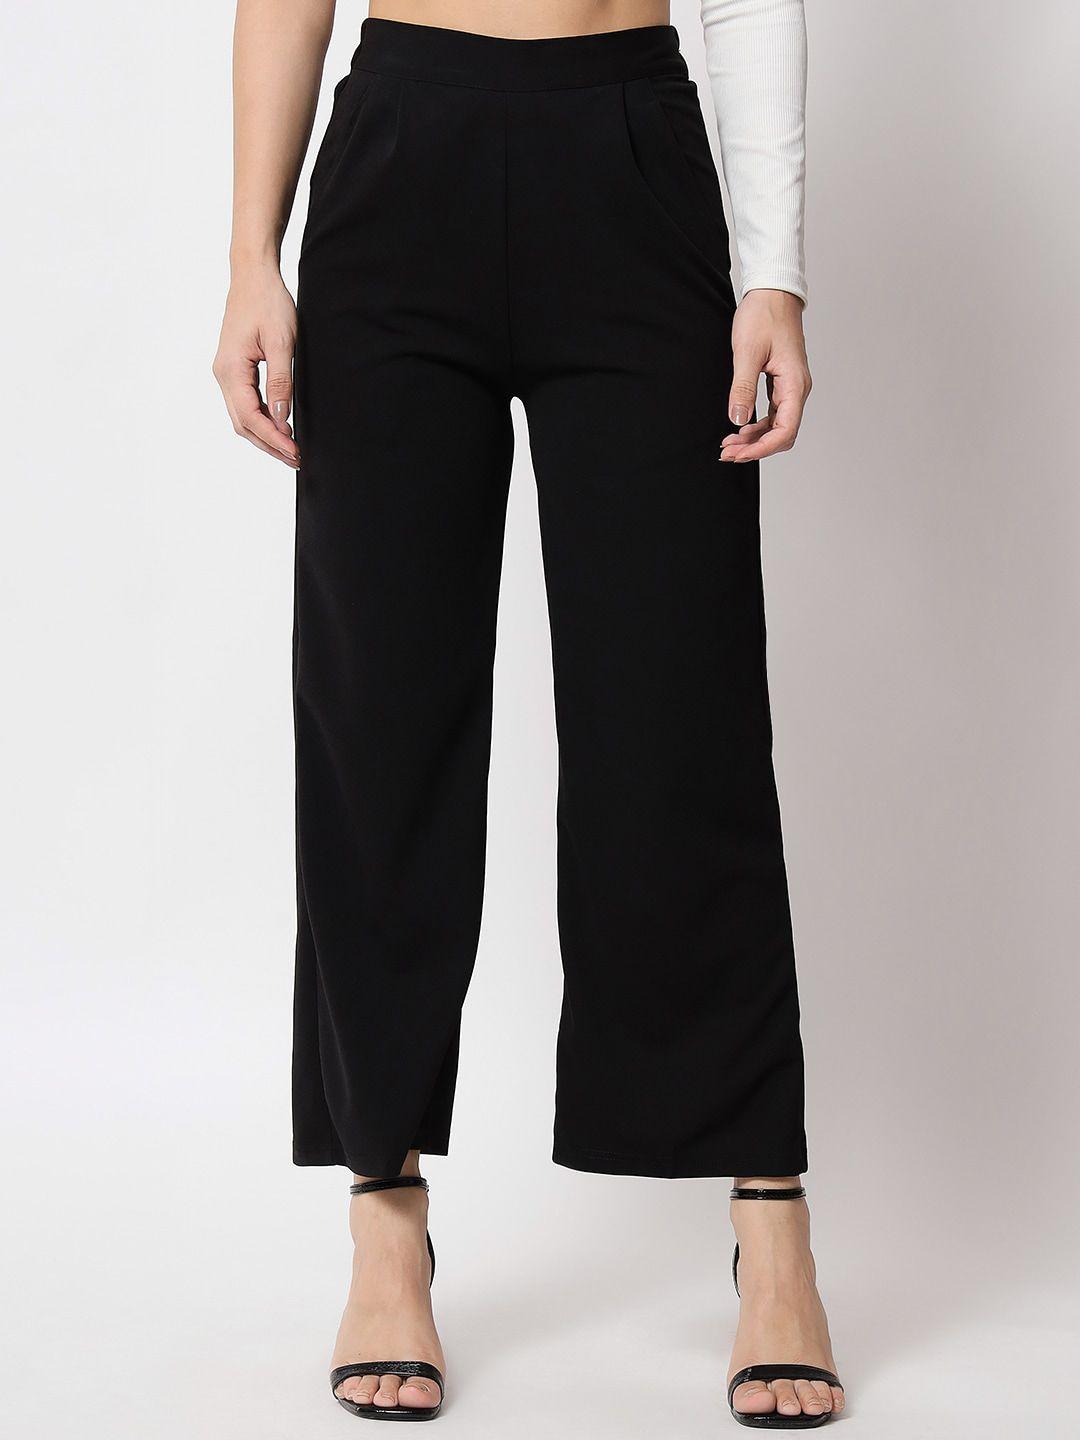 q-rious women black relaxed flared high-rise trousers